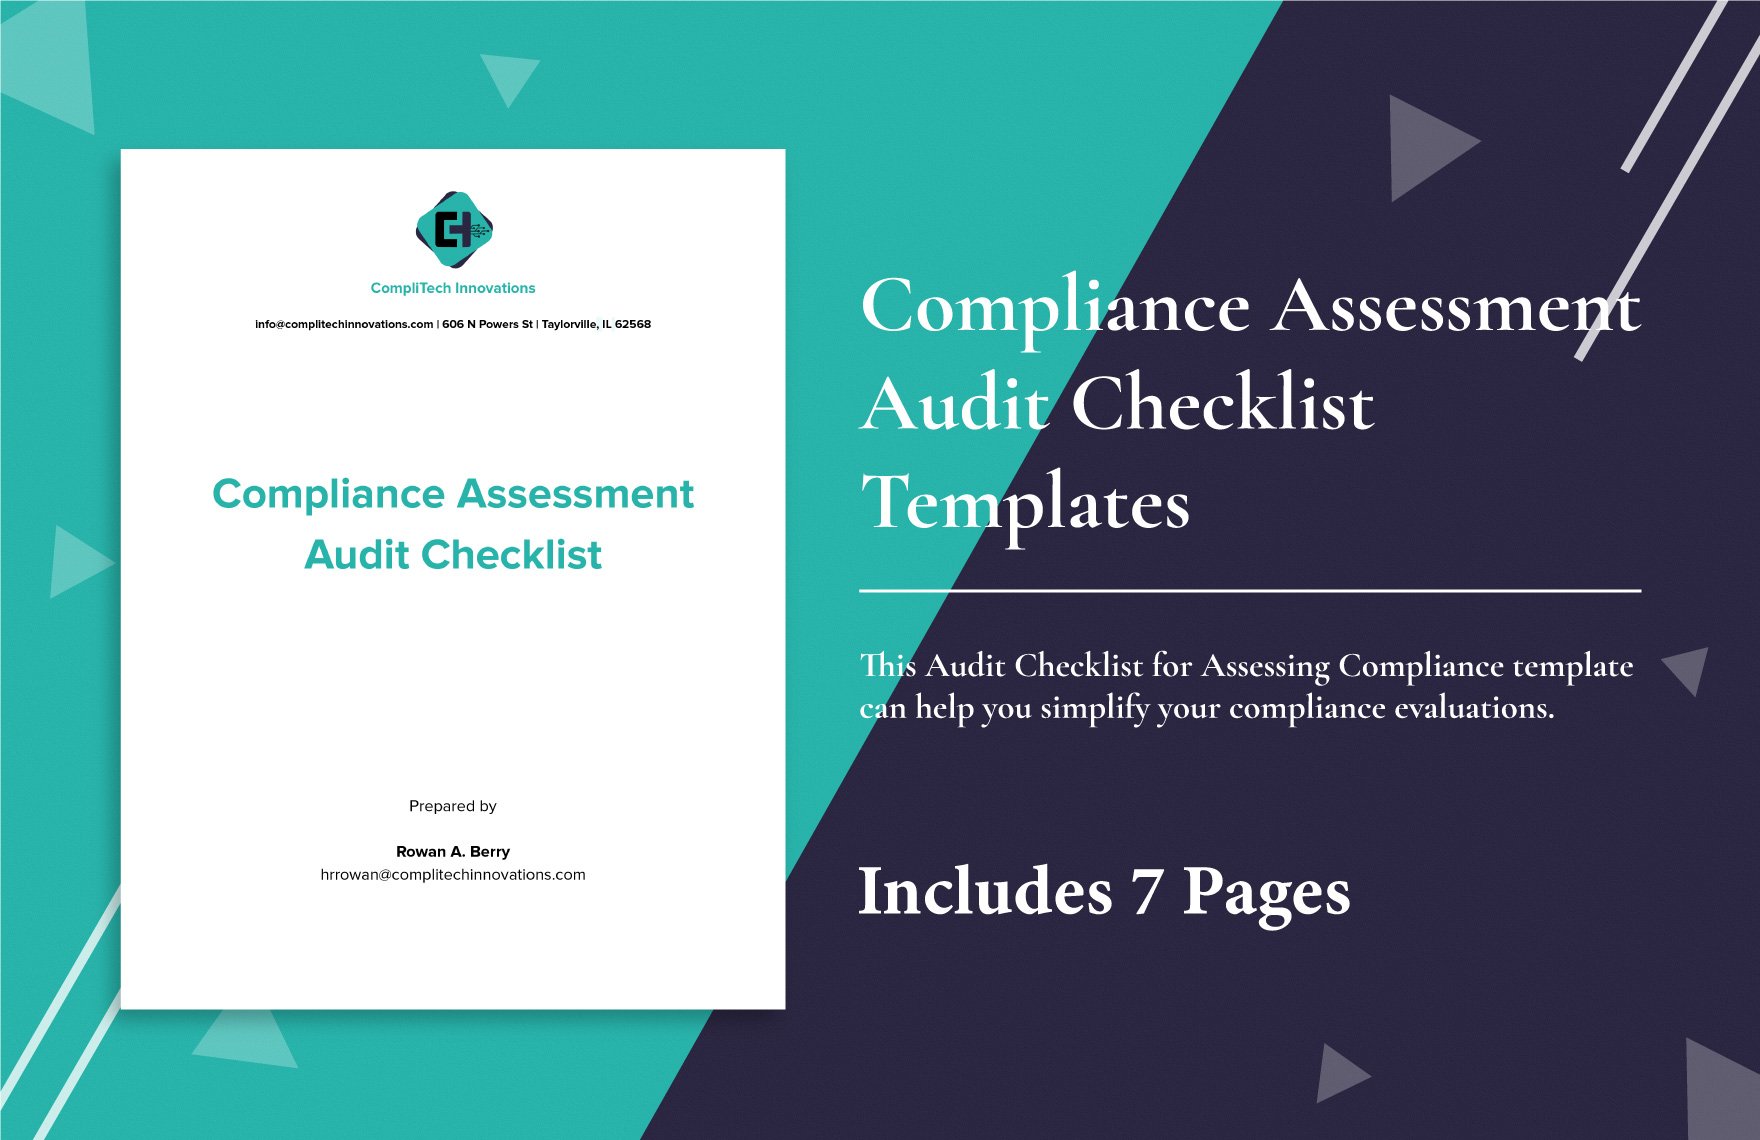 Audit Checklist for Assessing Compliance